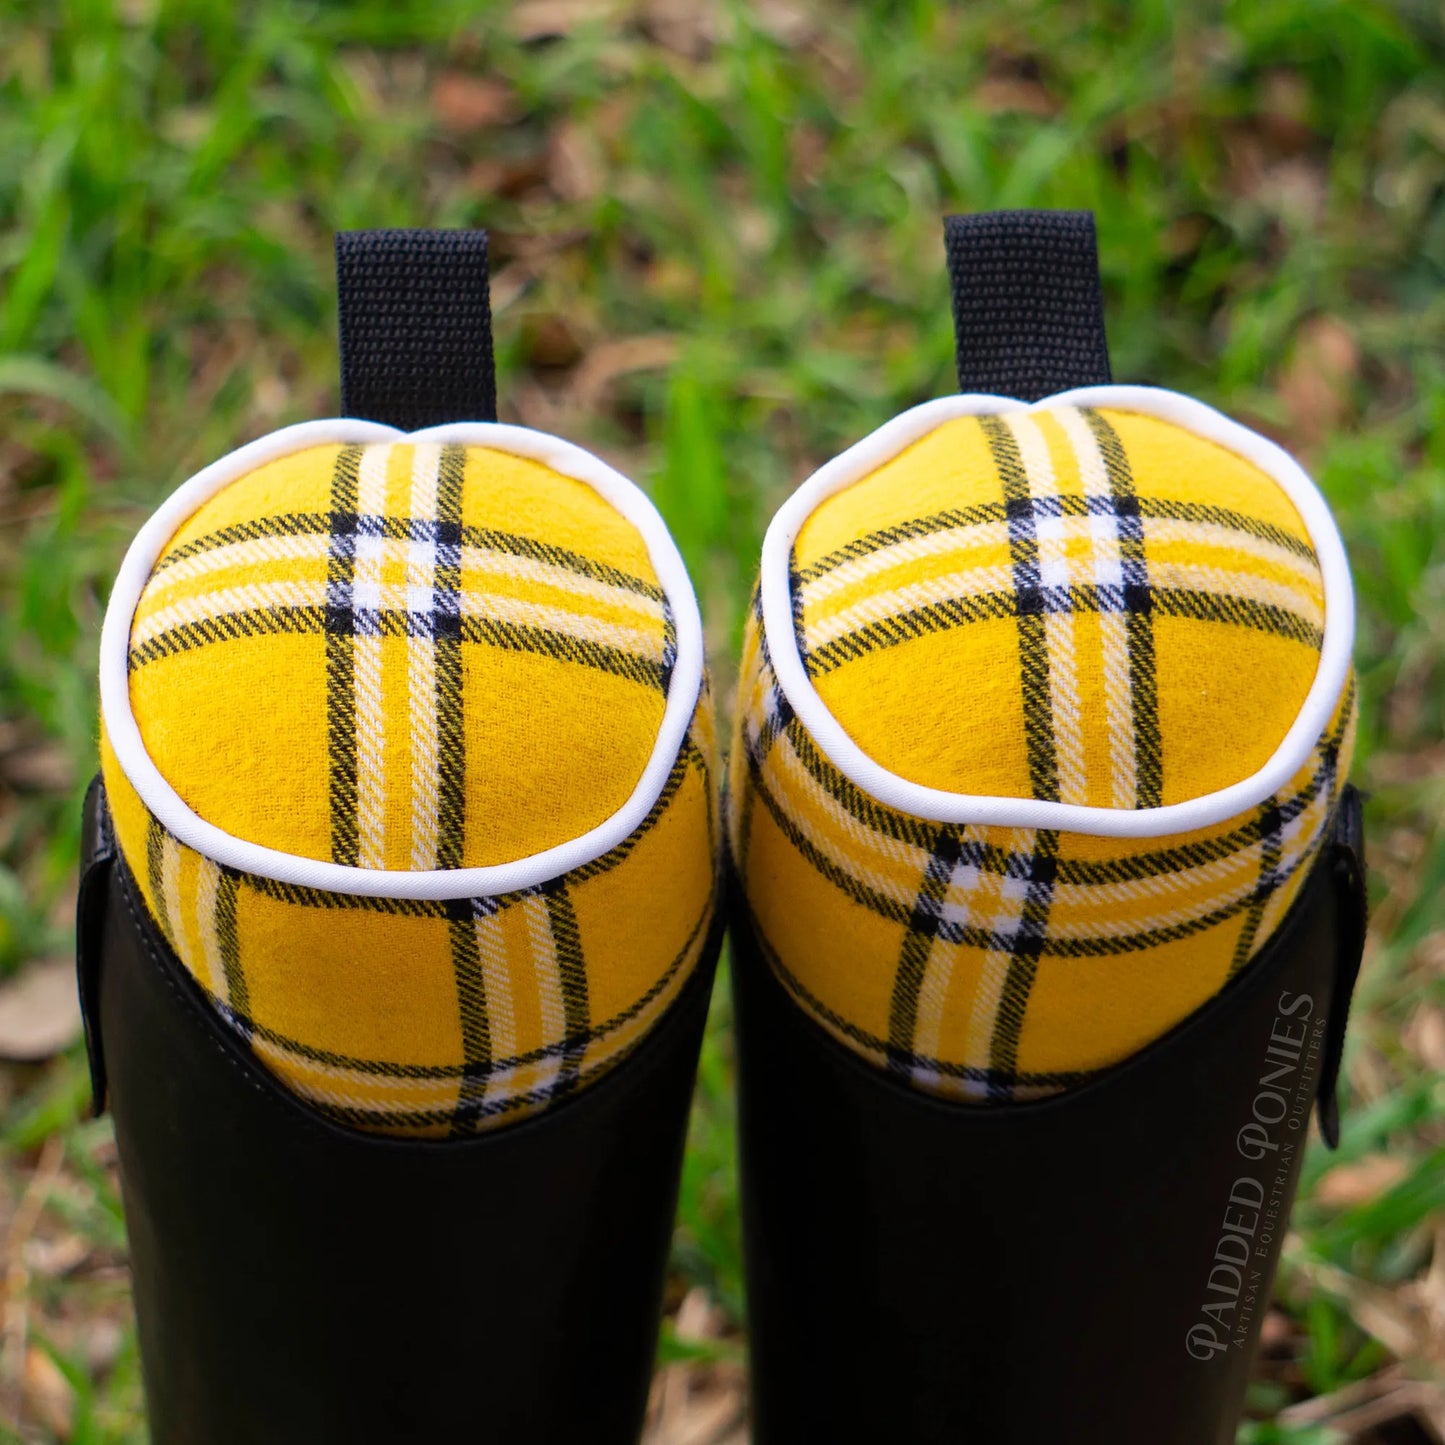 Yellow, Black, and White Plaid Flannel Boot Tree Stuffers